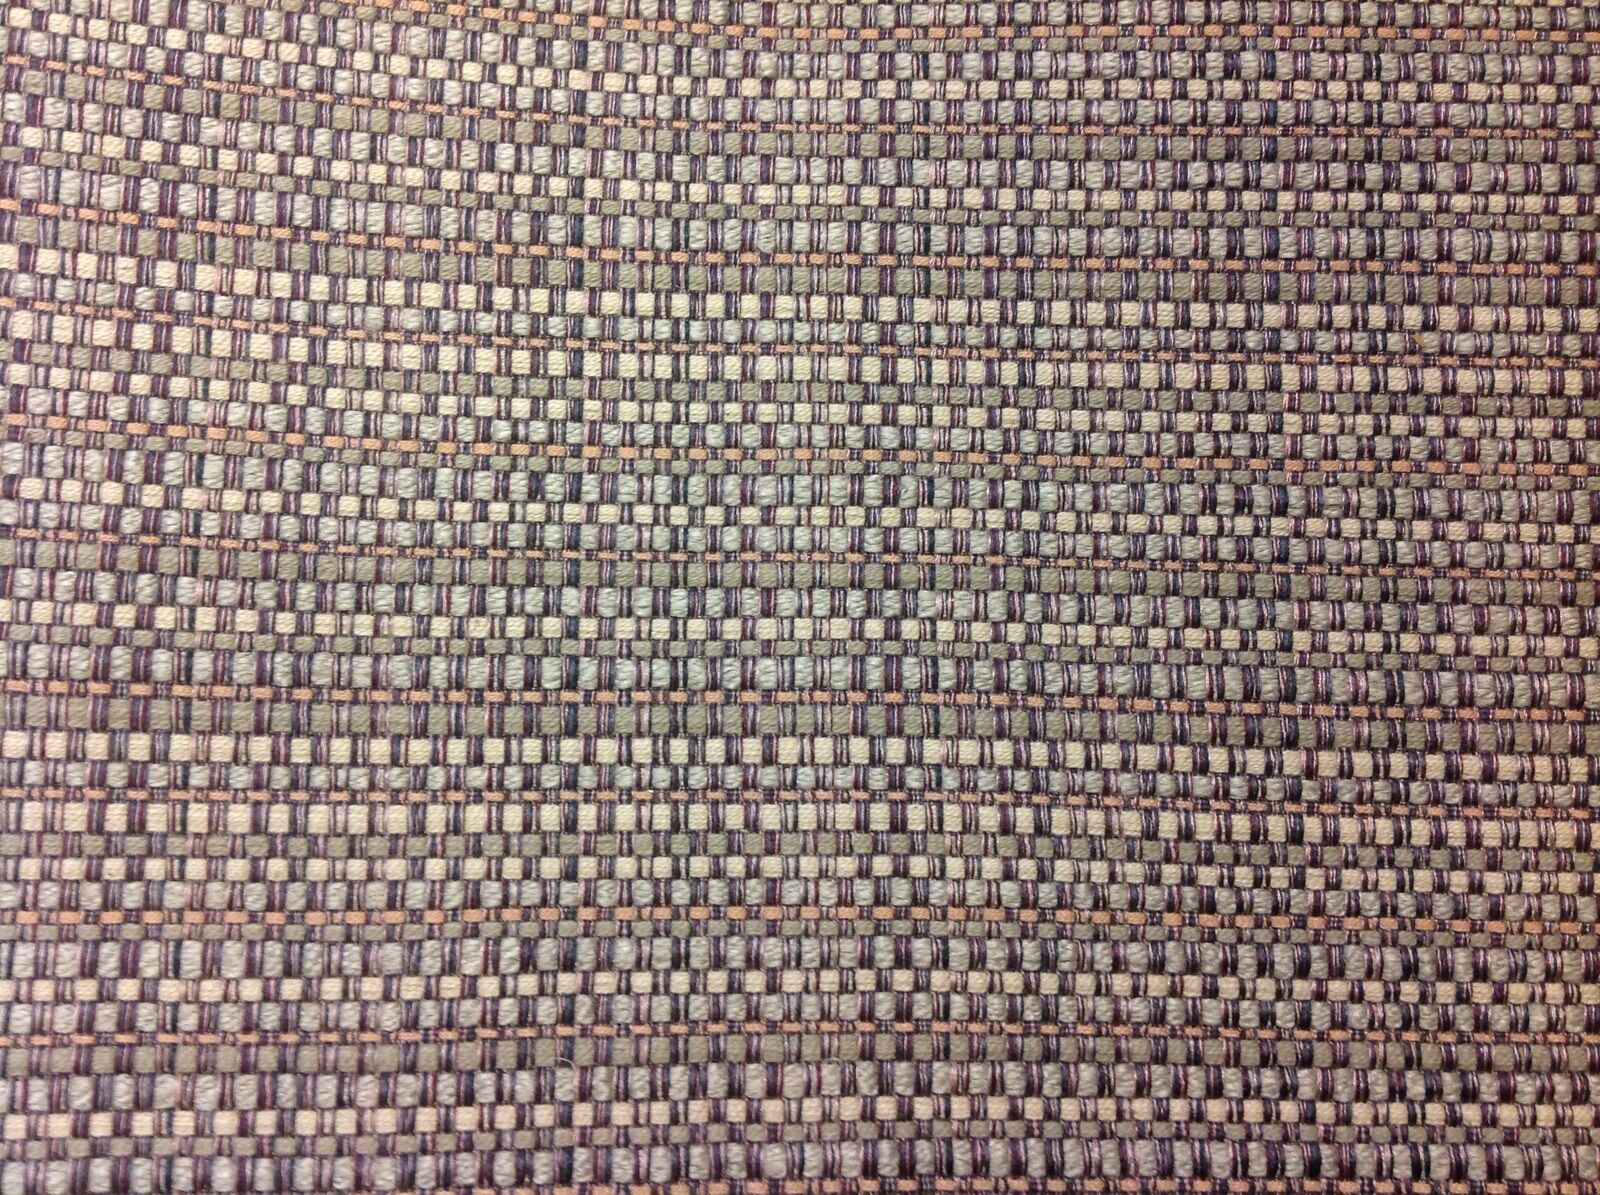 Kravet Couture Woven Tweed Upholstery Fabric- Masonry/Aubergine 2.45 yd 28647-10